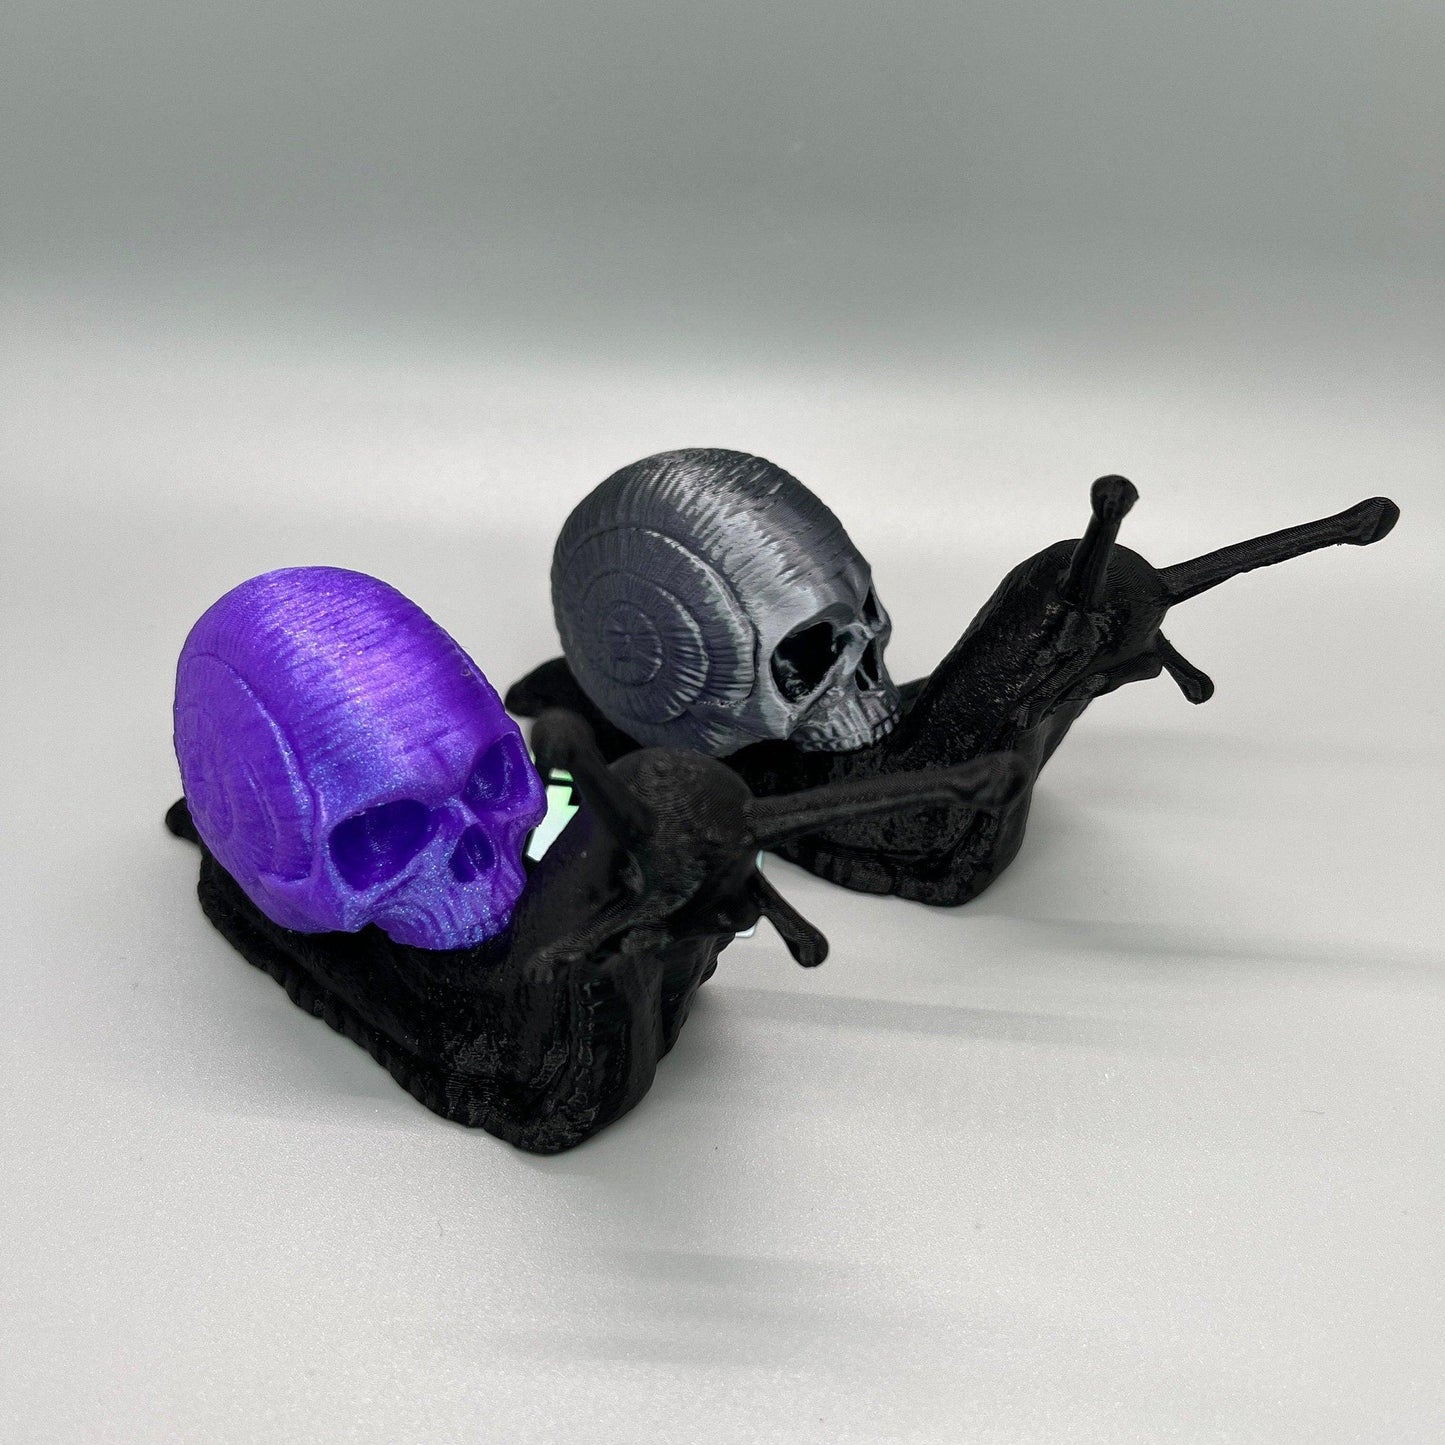 Death Snail with Skull Shell | 3D Printed - Squee Prints